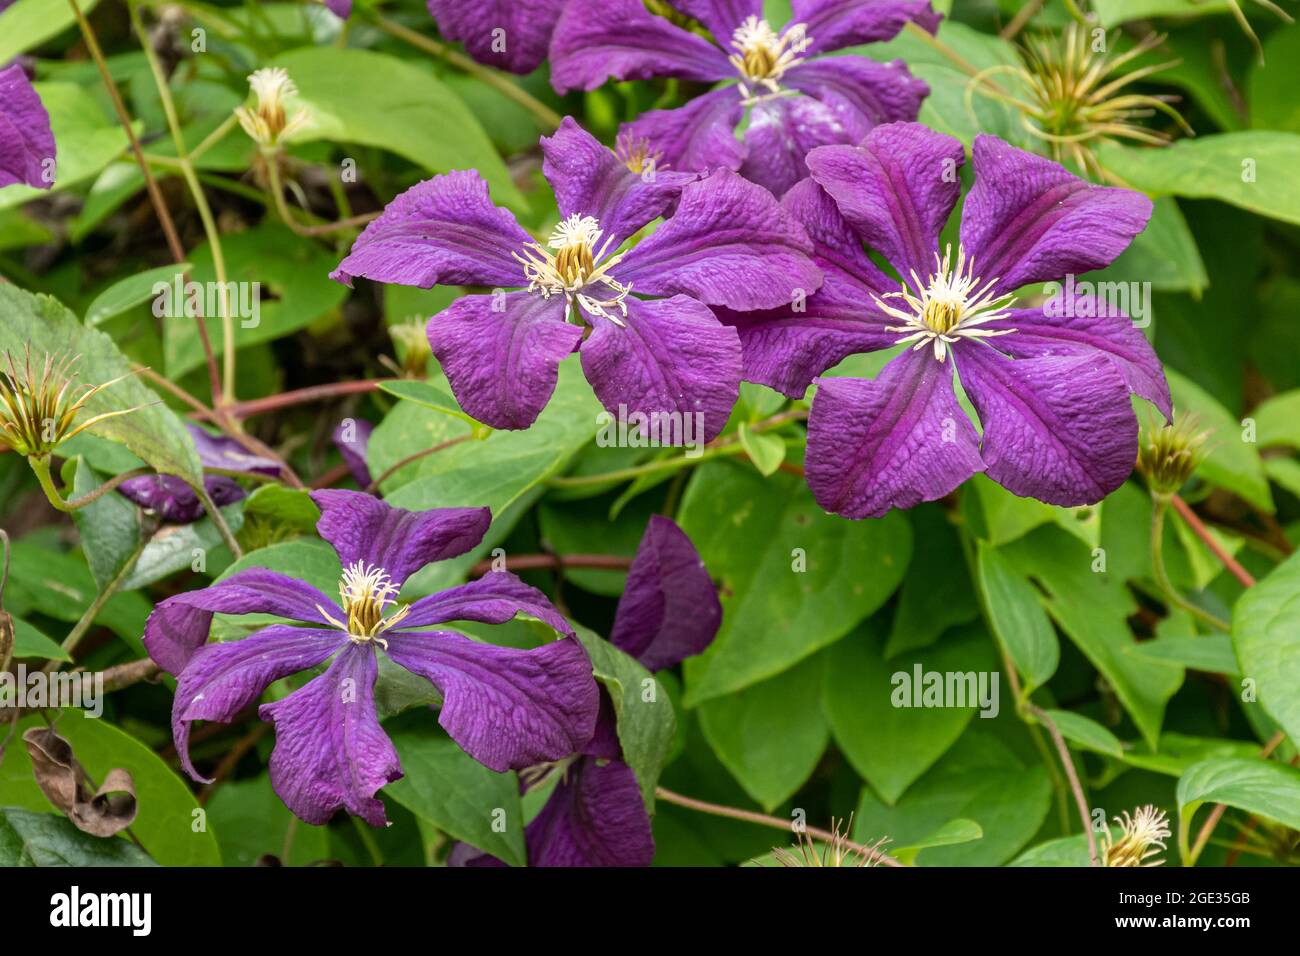 Clematis viticella 'Etoille Violette', a climbing plant with profuse purple flowers in summer, UK Stock Photo